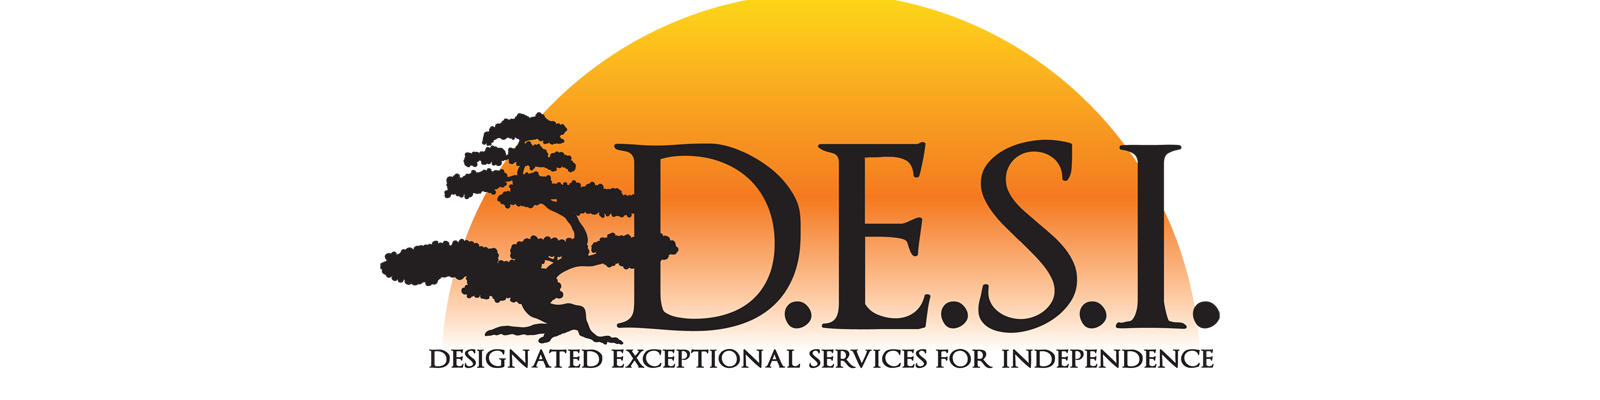 Designated Exceptional Services for Independence logo